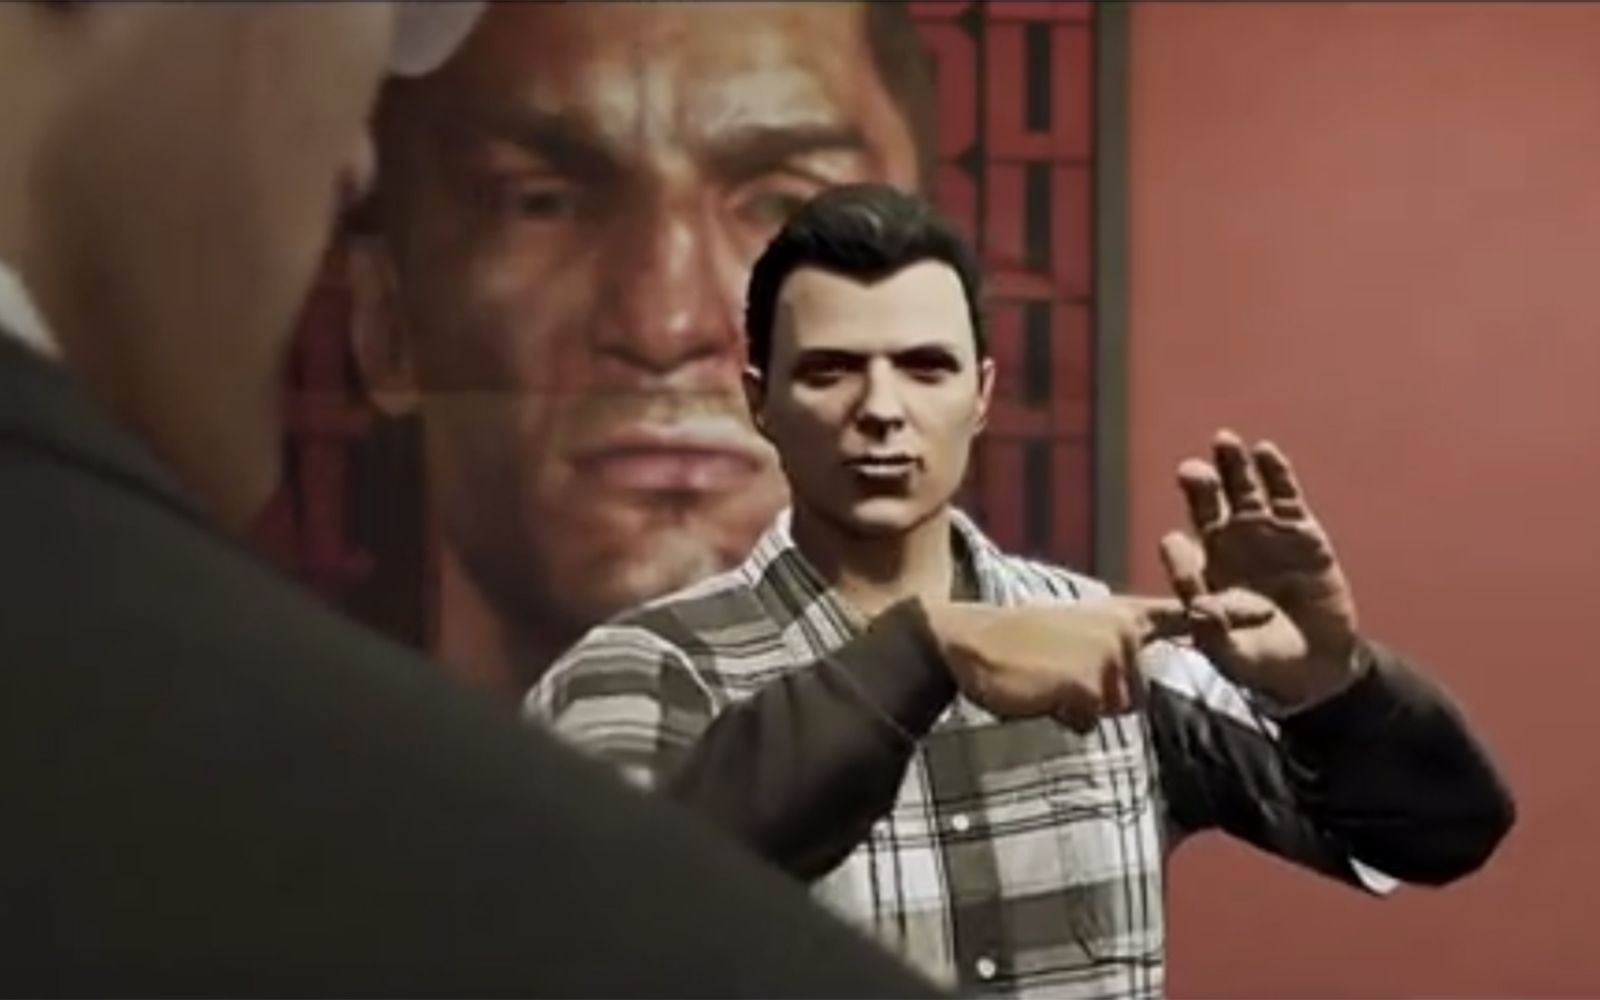 gta online most wanted trailer will crack you up and leave you wanting more image 1